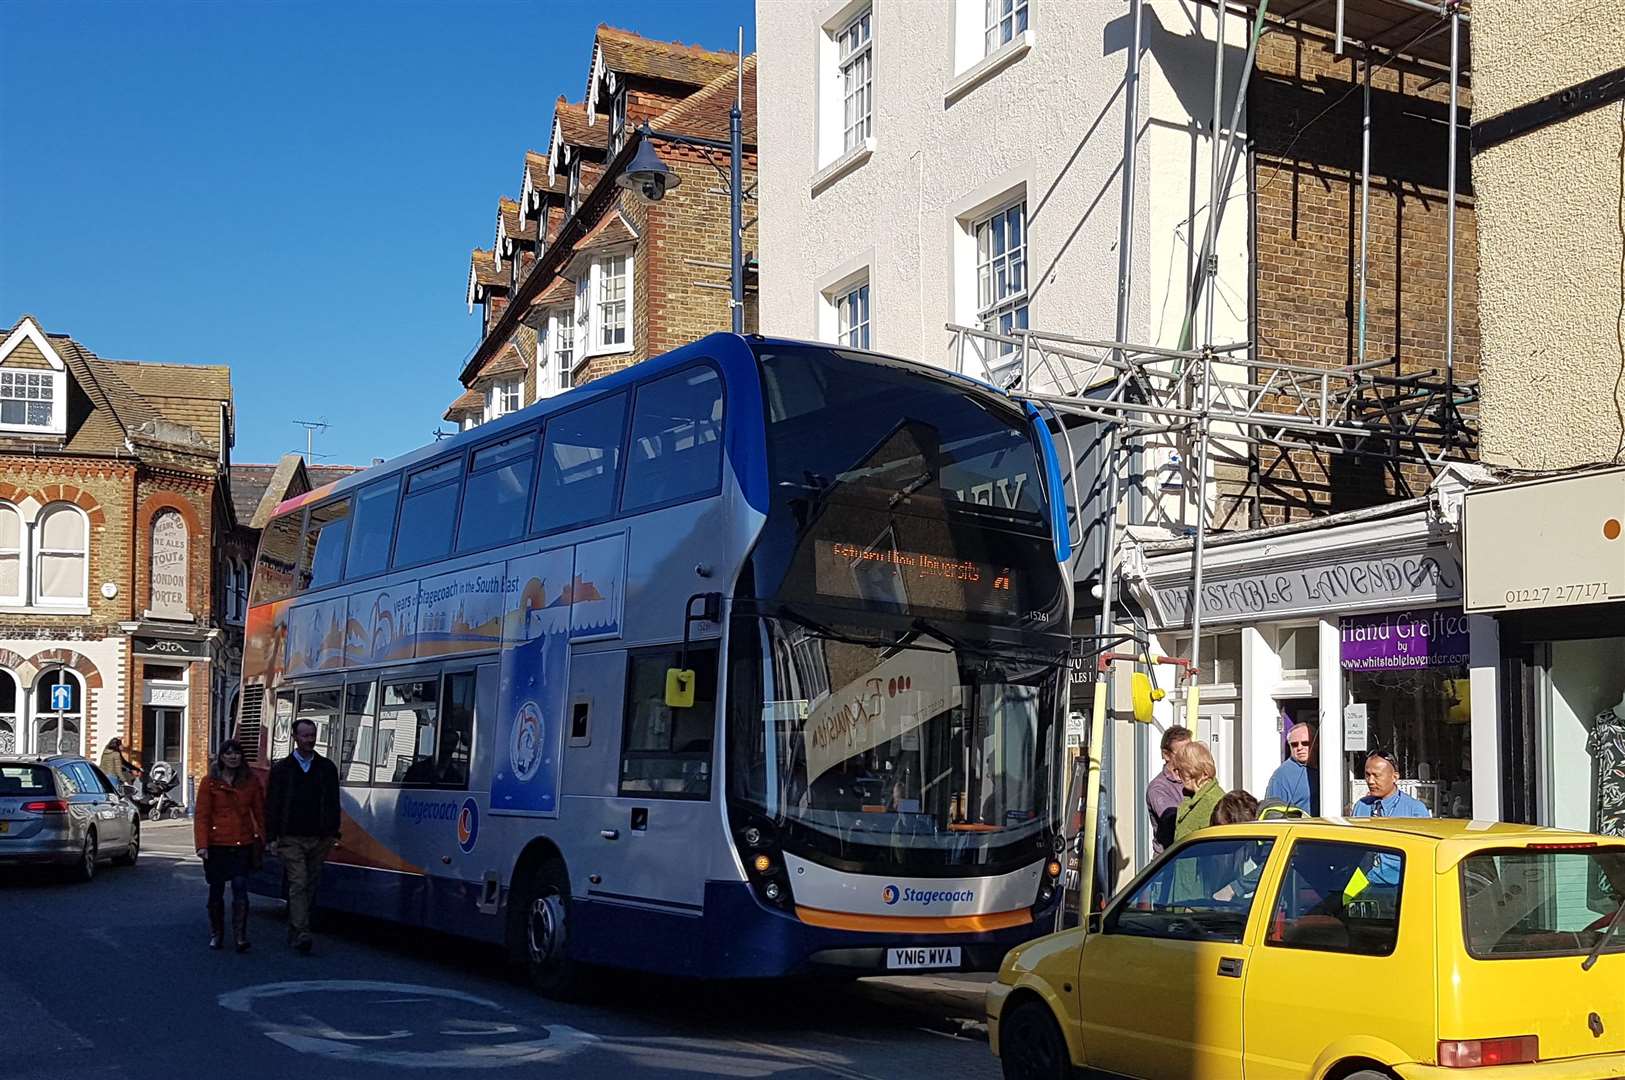 A bus appears to have collided with scaffolding in Whitstable. Picture: Chris Davey (7410416)